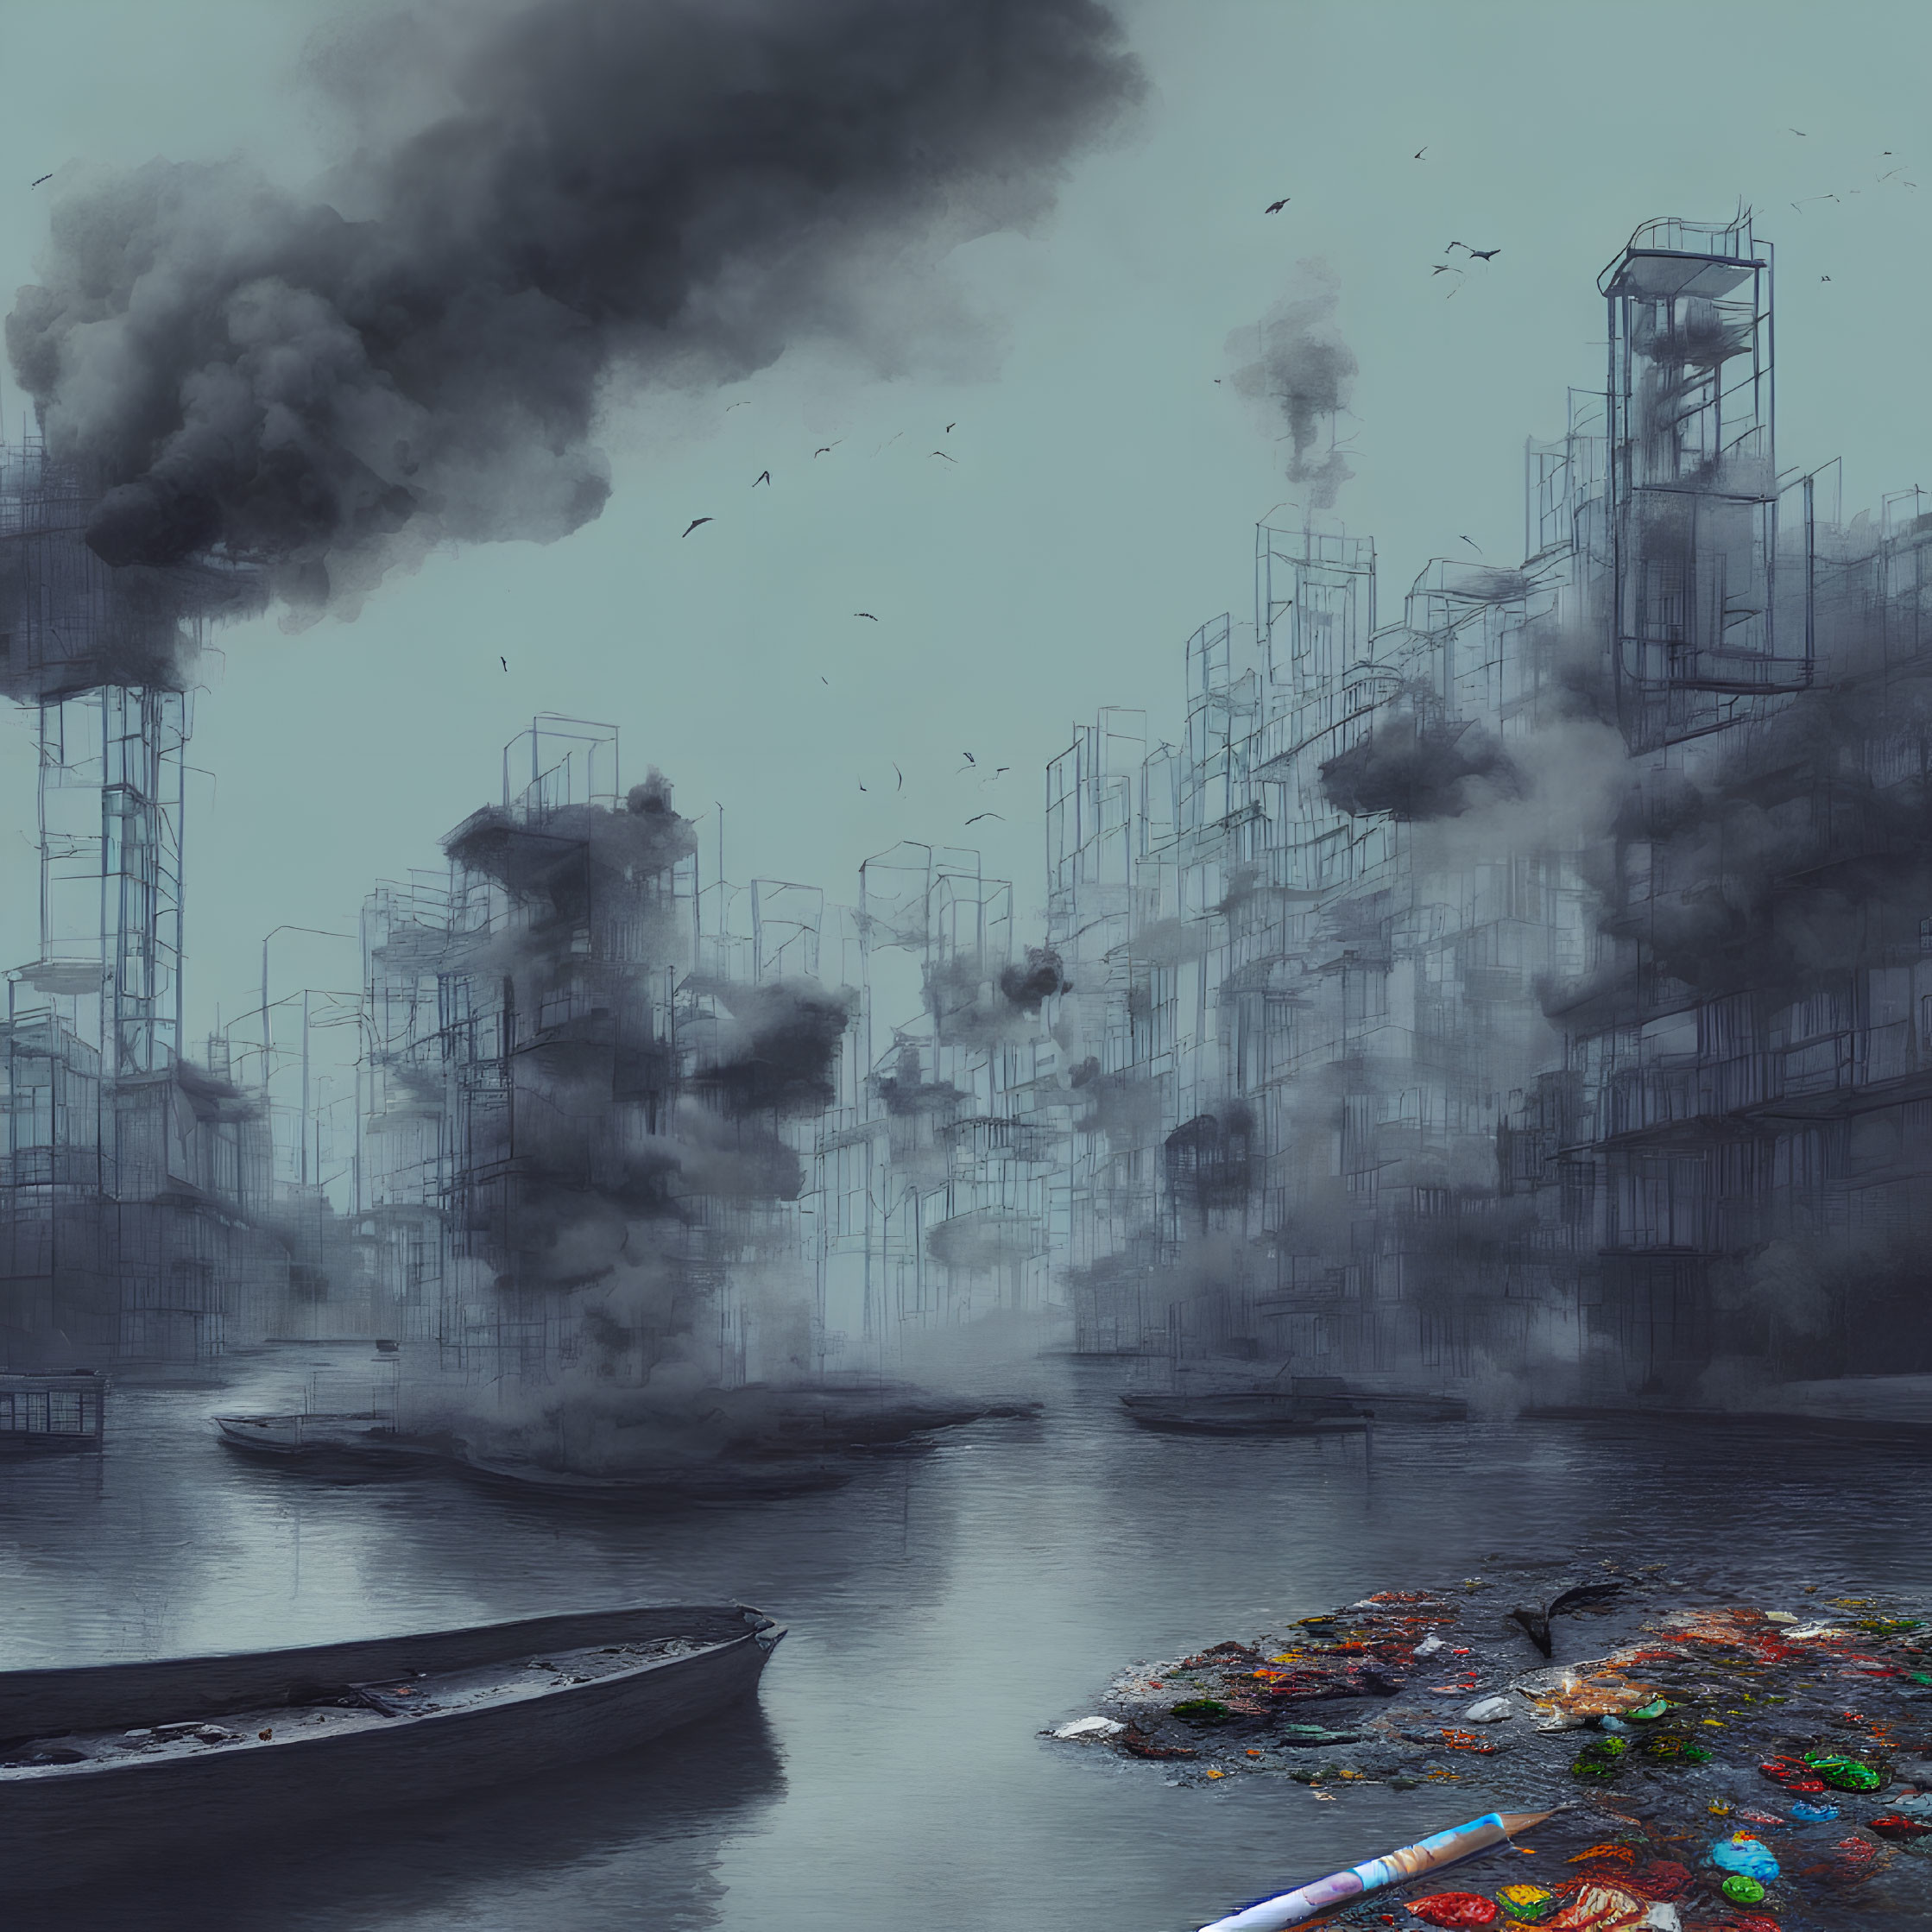 Dystopian cityscape with industrial towers, birds, boats, and colorful debris